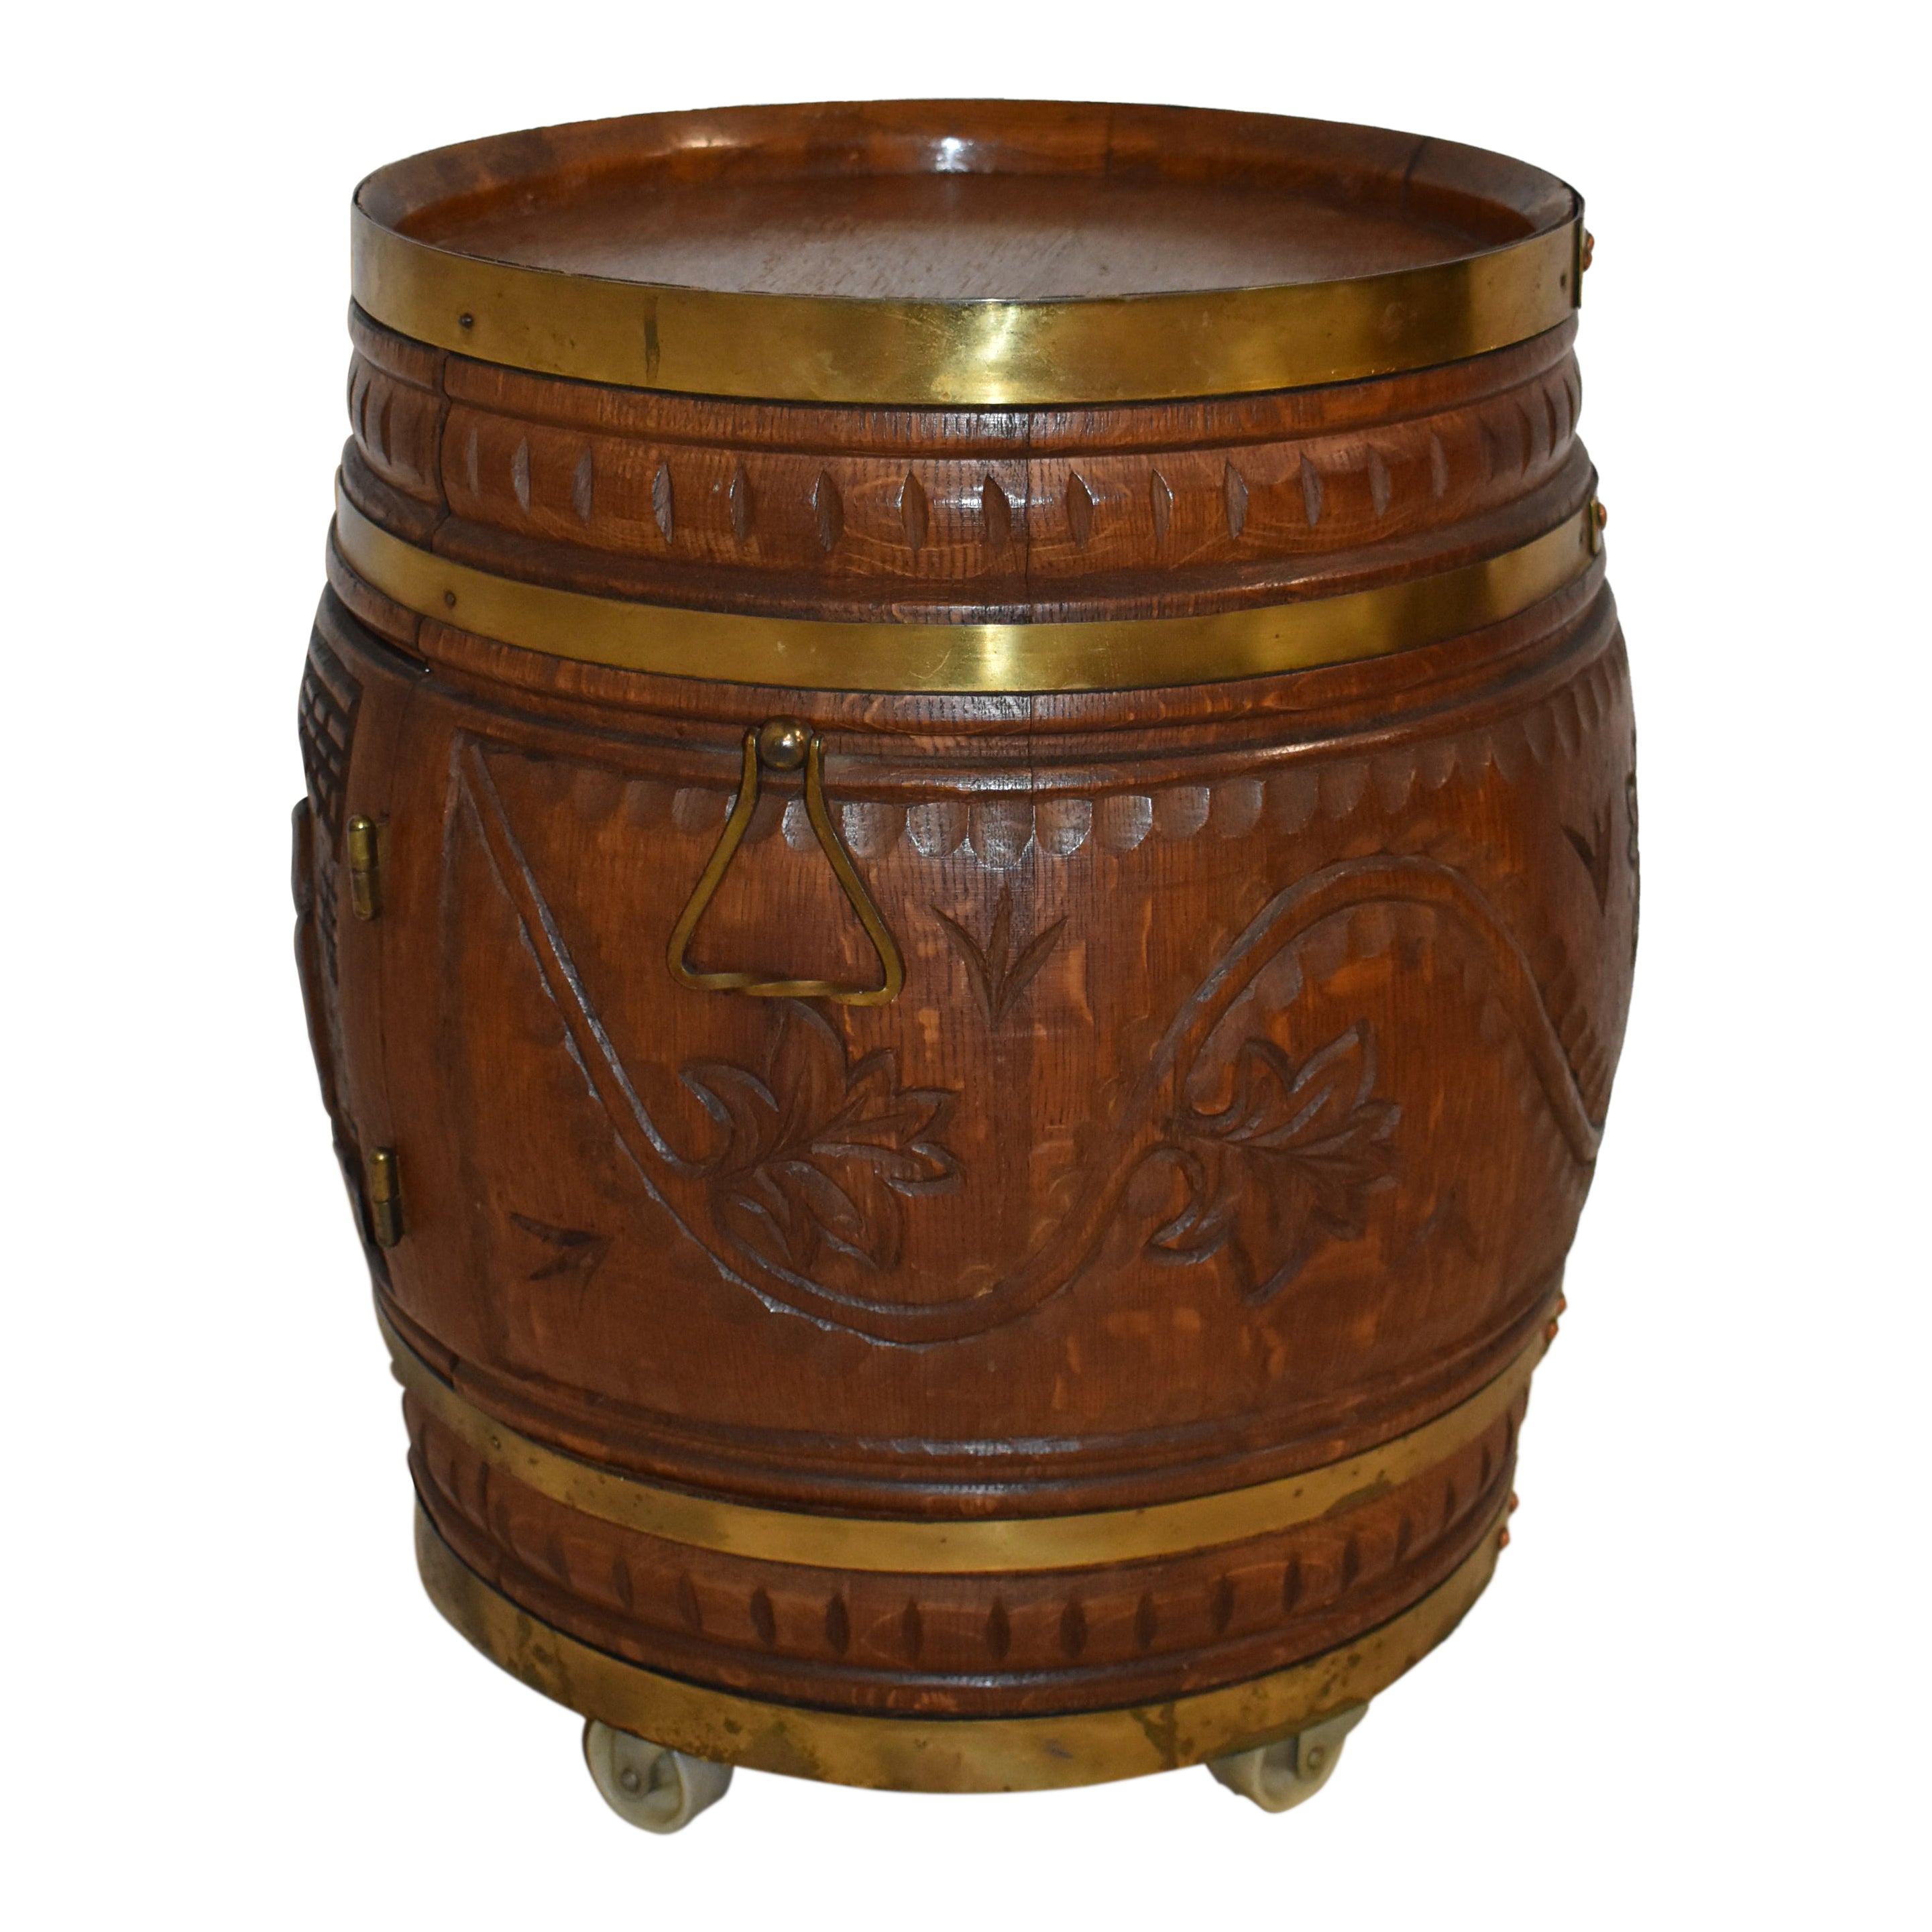 Carved Barrel with Liquor Cabinet